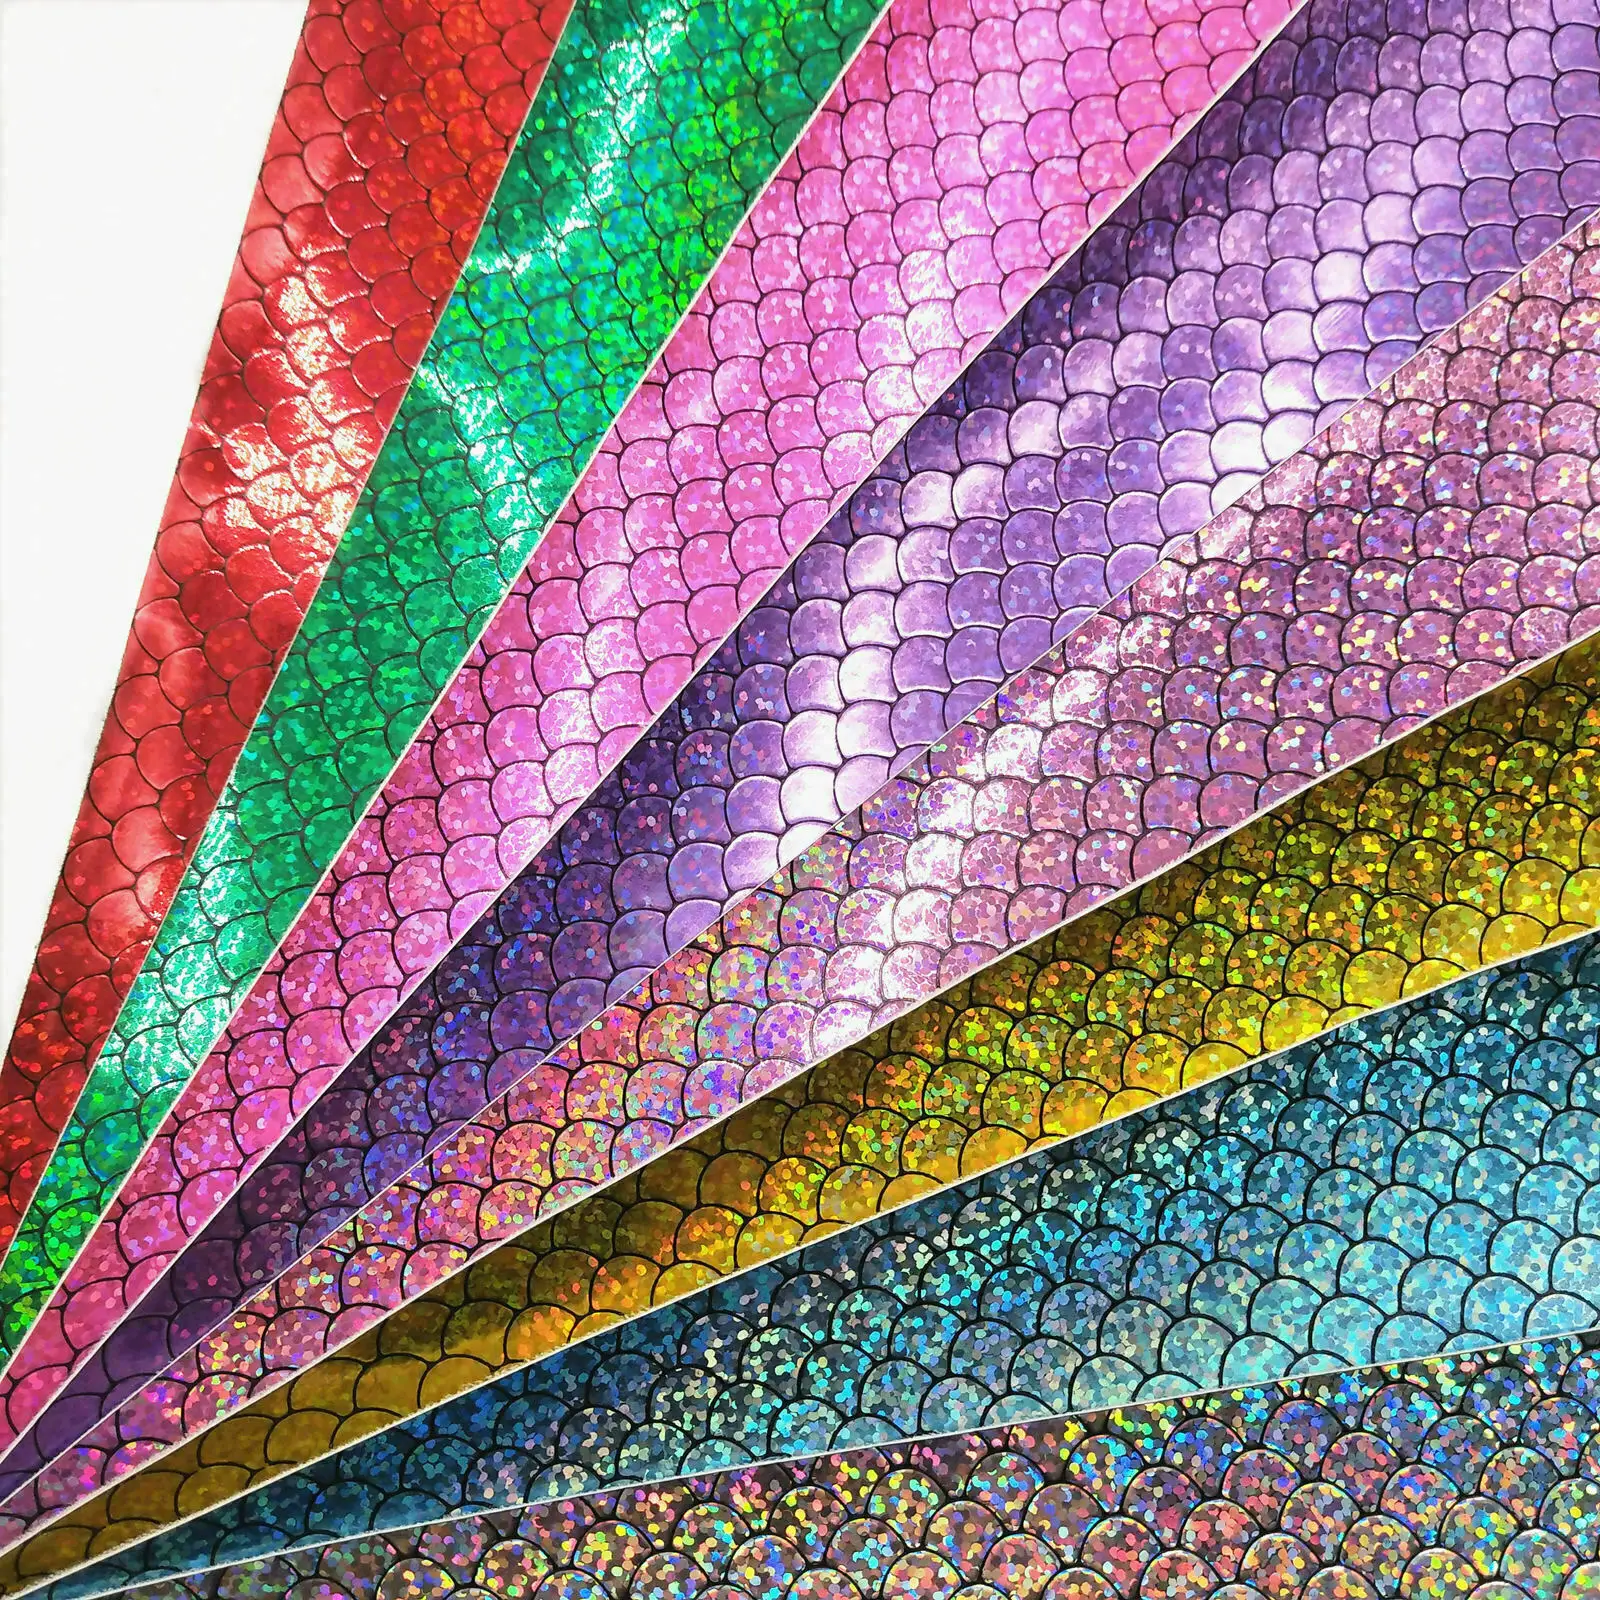 

By The Yard For Shoes Bag Bow Crafting Holographic Mermaid Scale Vinyl Fabric Sequins Faux Leather Sheets